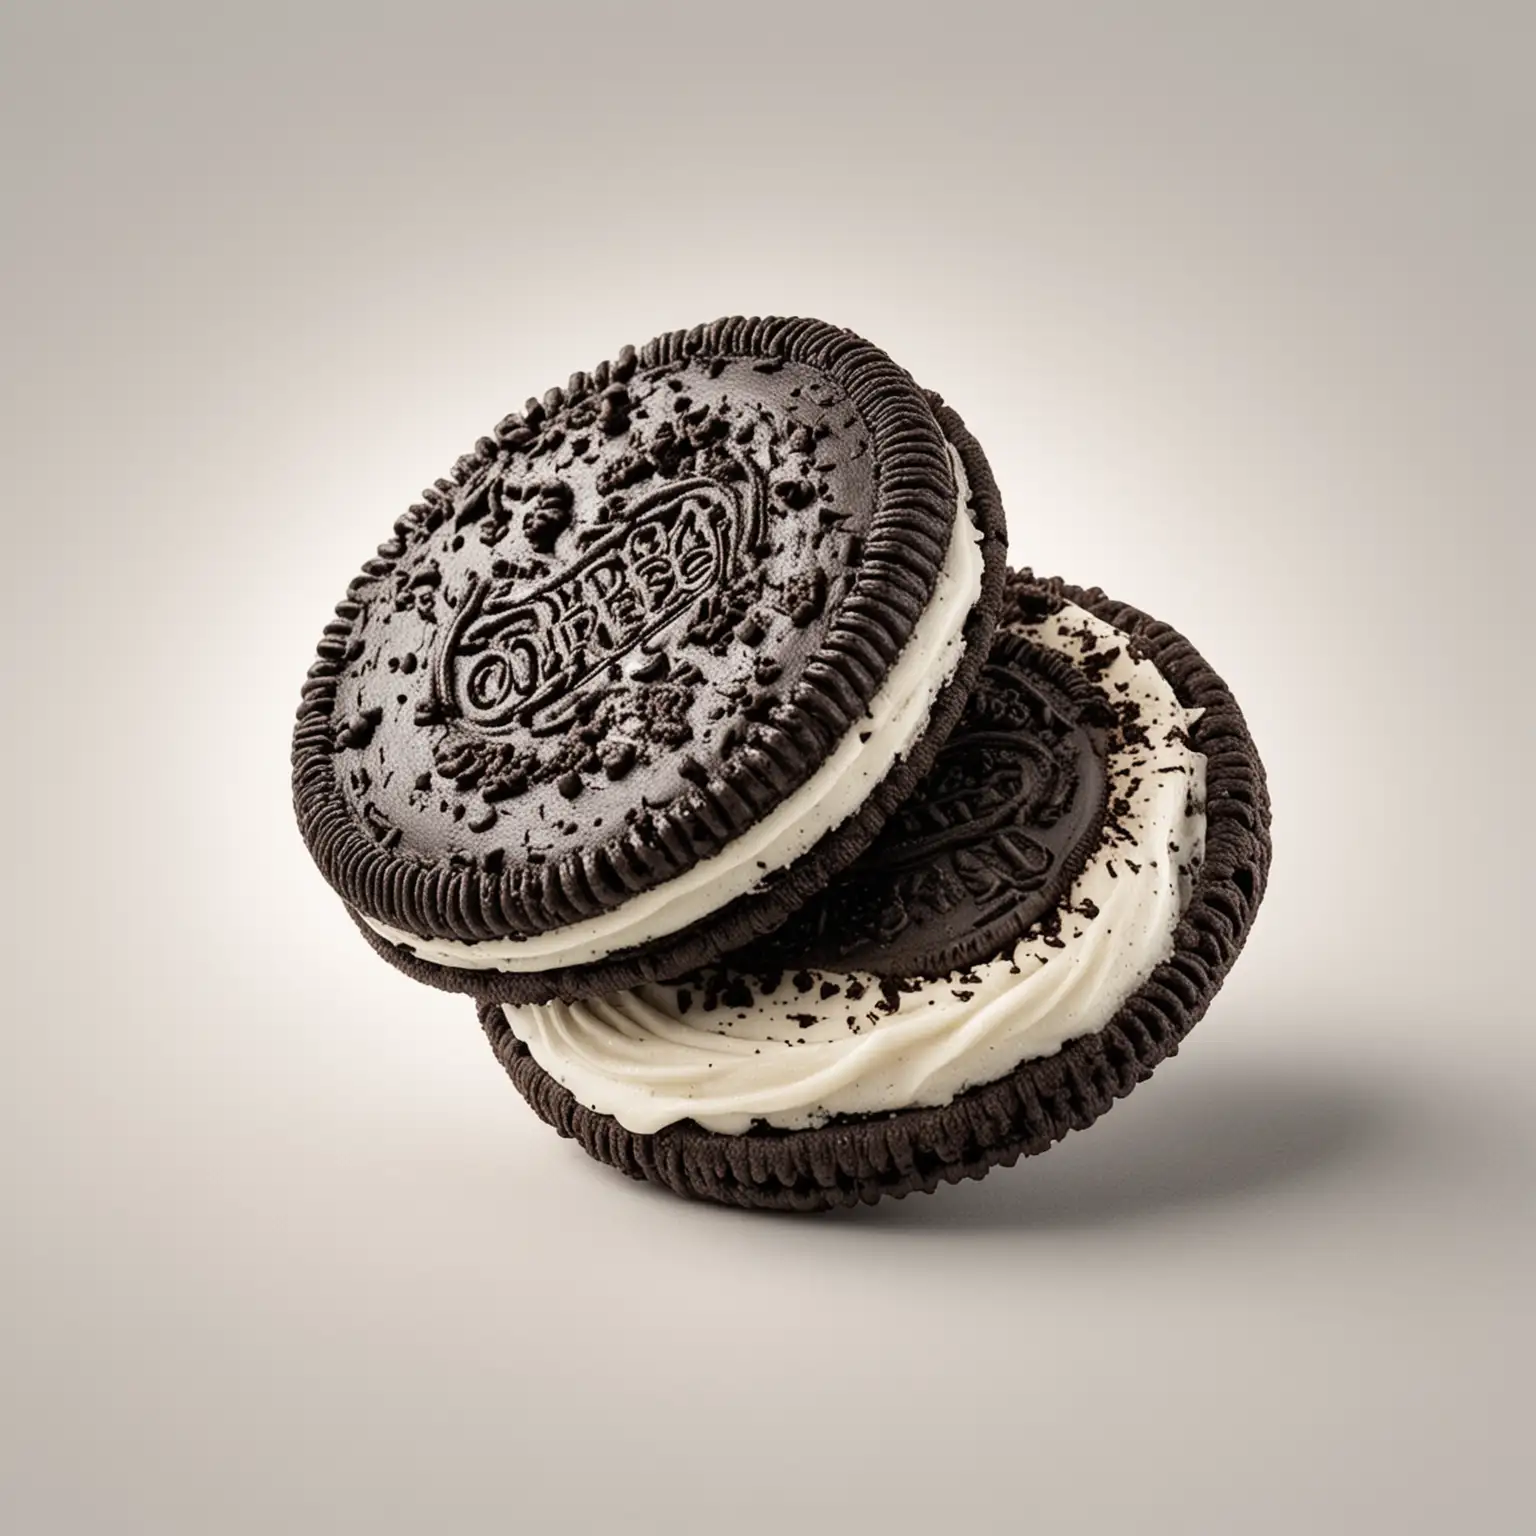 Assorted-Oreo-Cookies-on-Clean-White-Background-Delicious-Snack-Collection